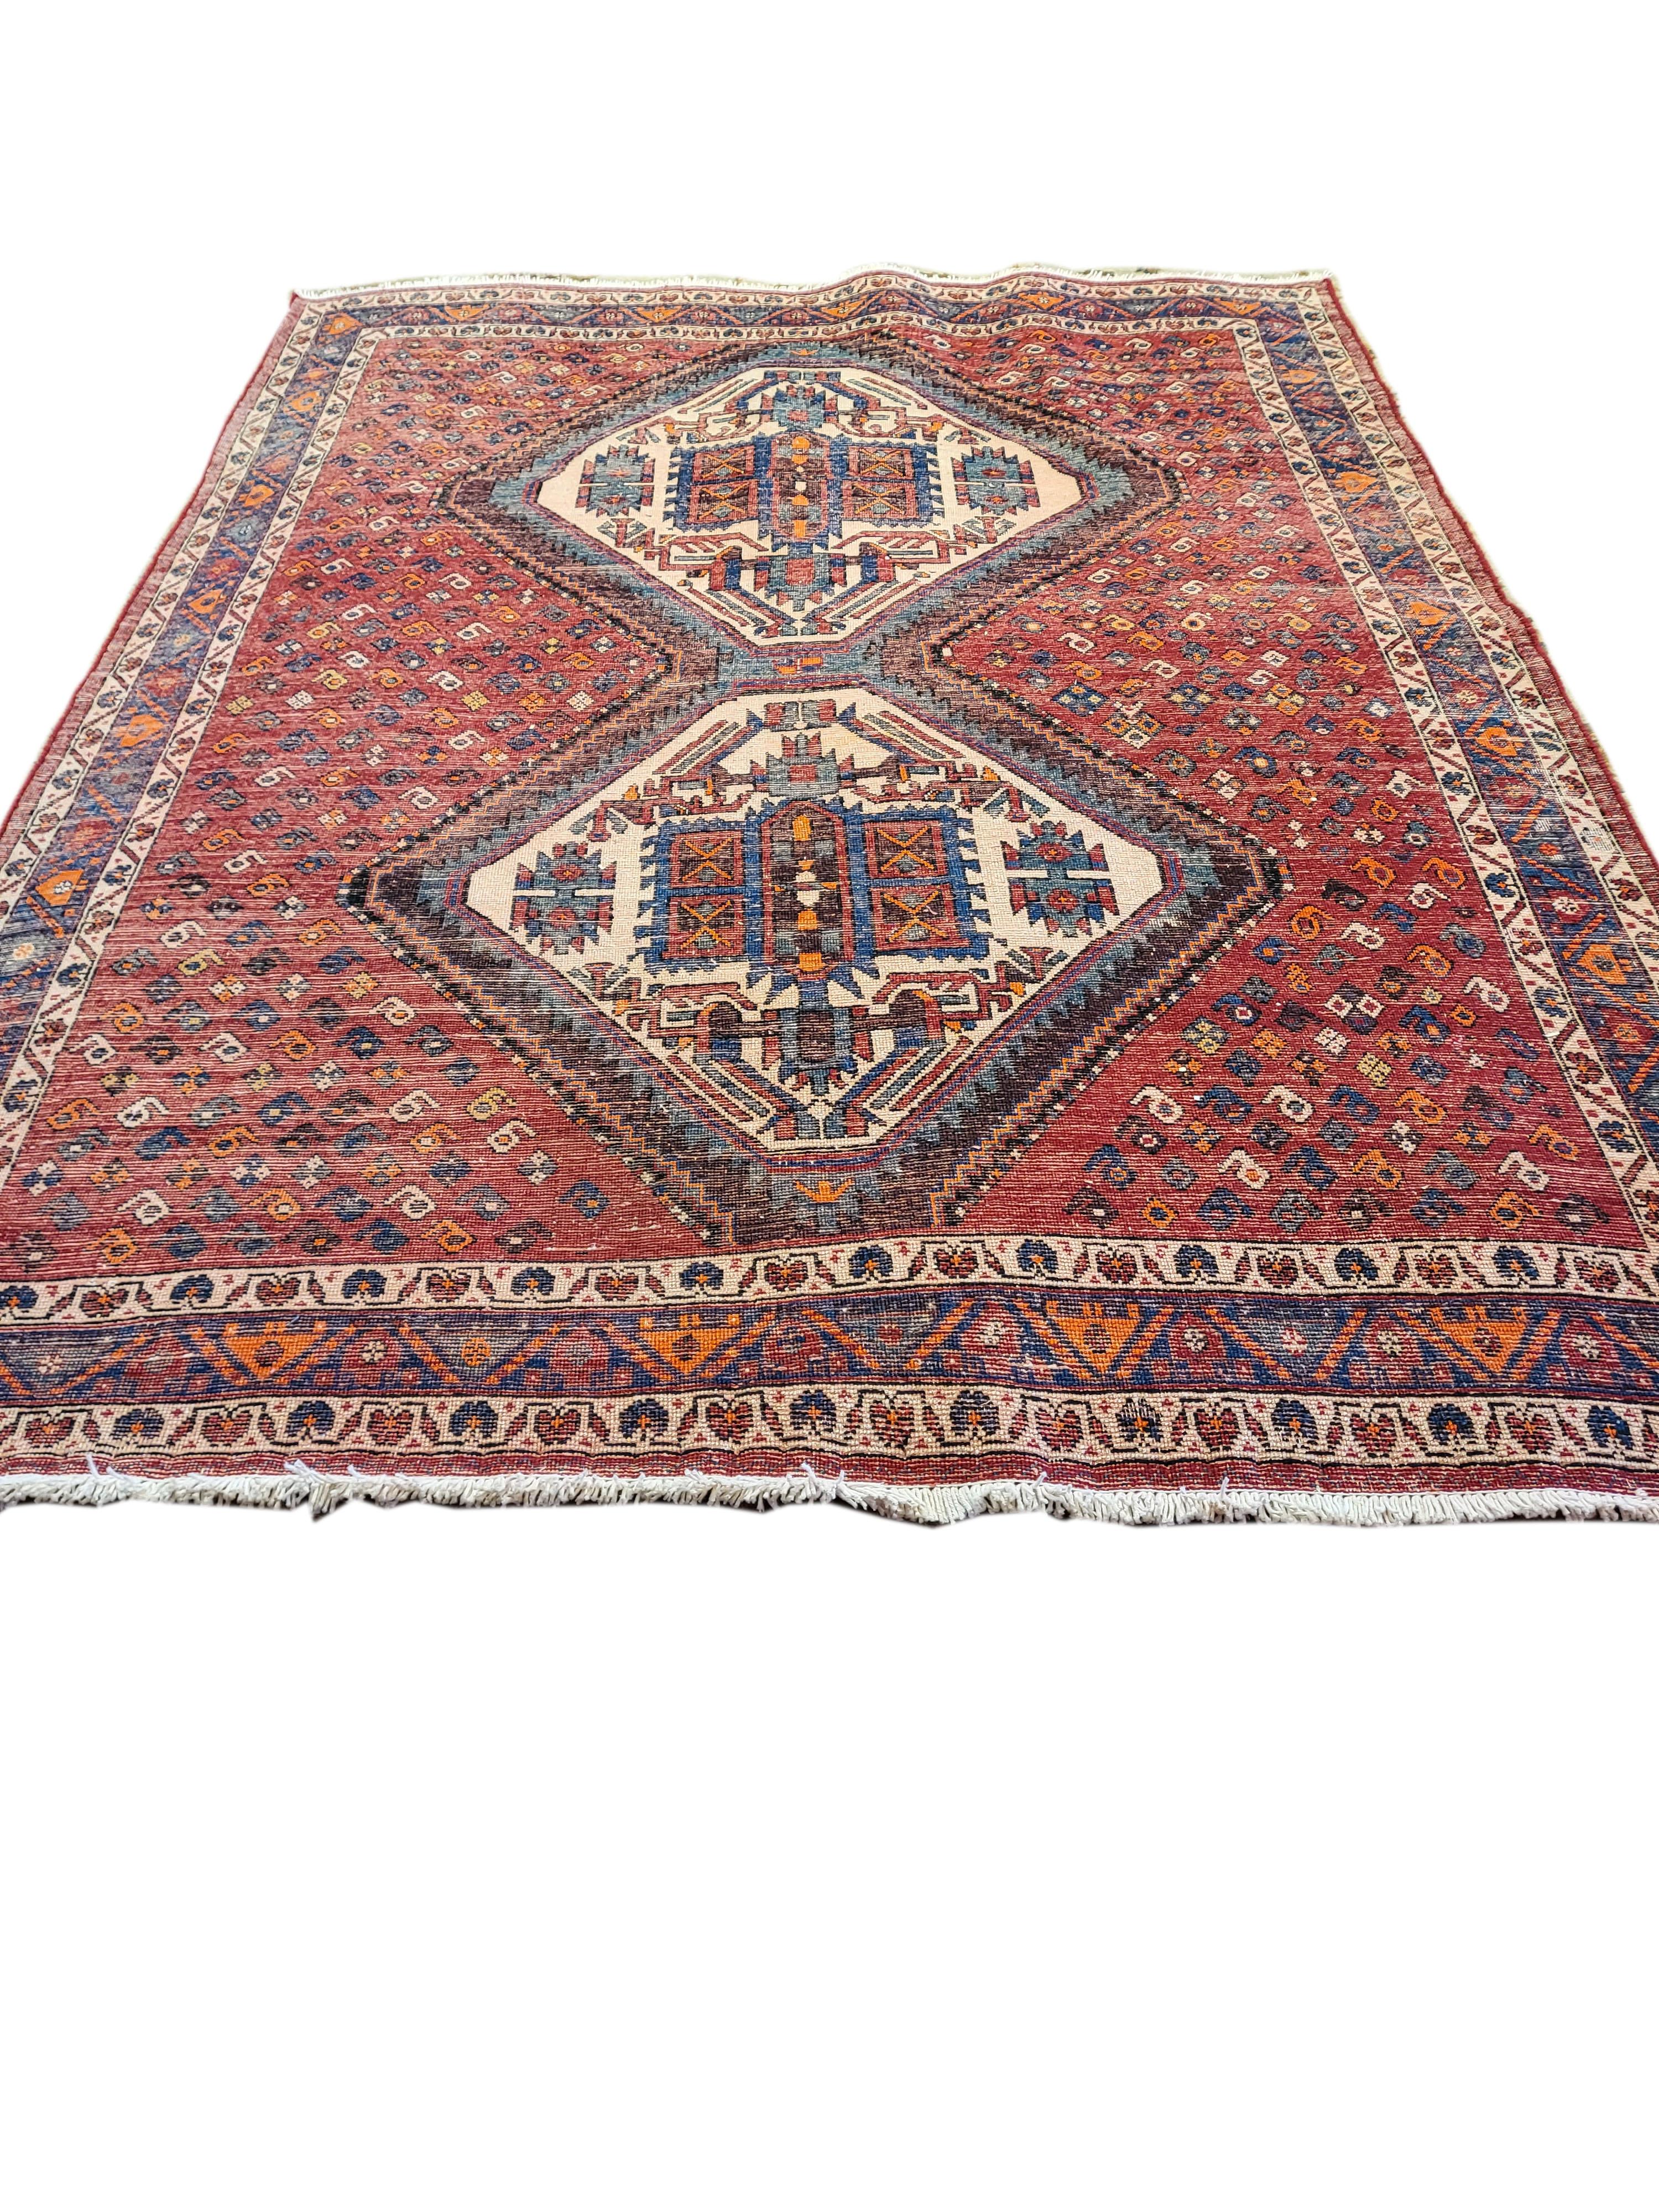 Hand-Knotted 5'x7' Antique Sirjan / Afshar - Tribal Persian Rug - Rust / Cream / Blue For Sale